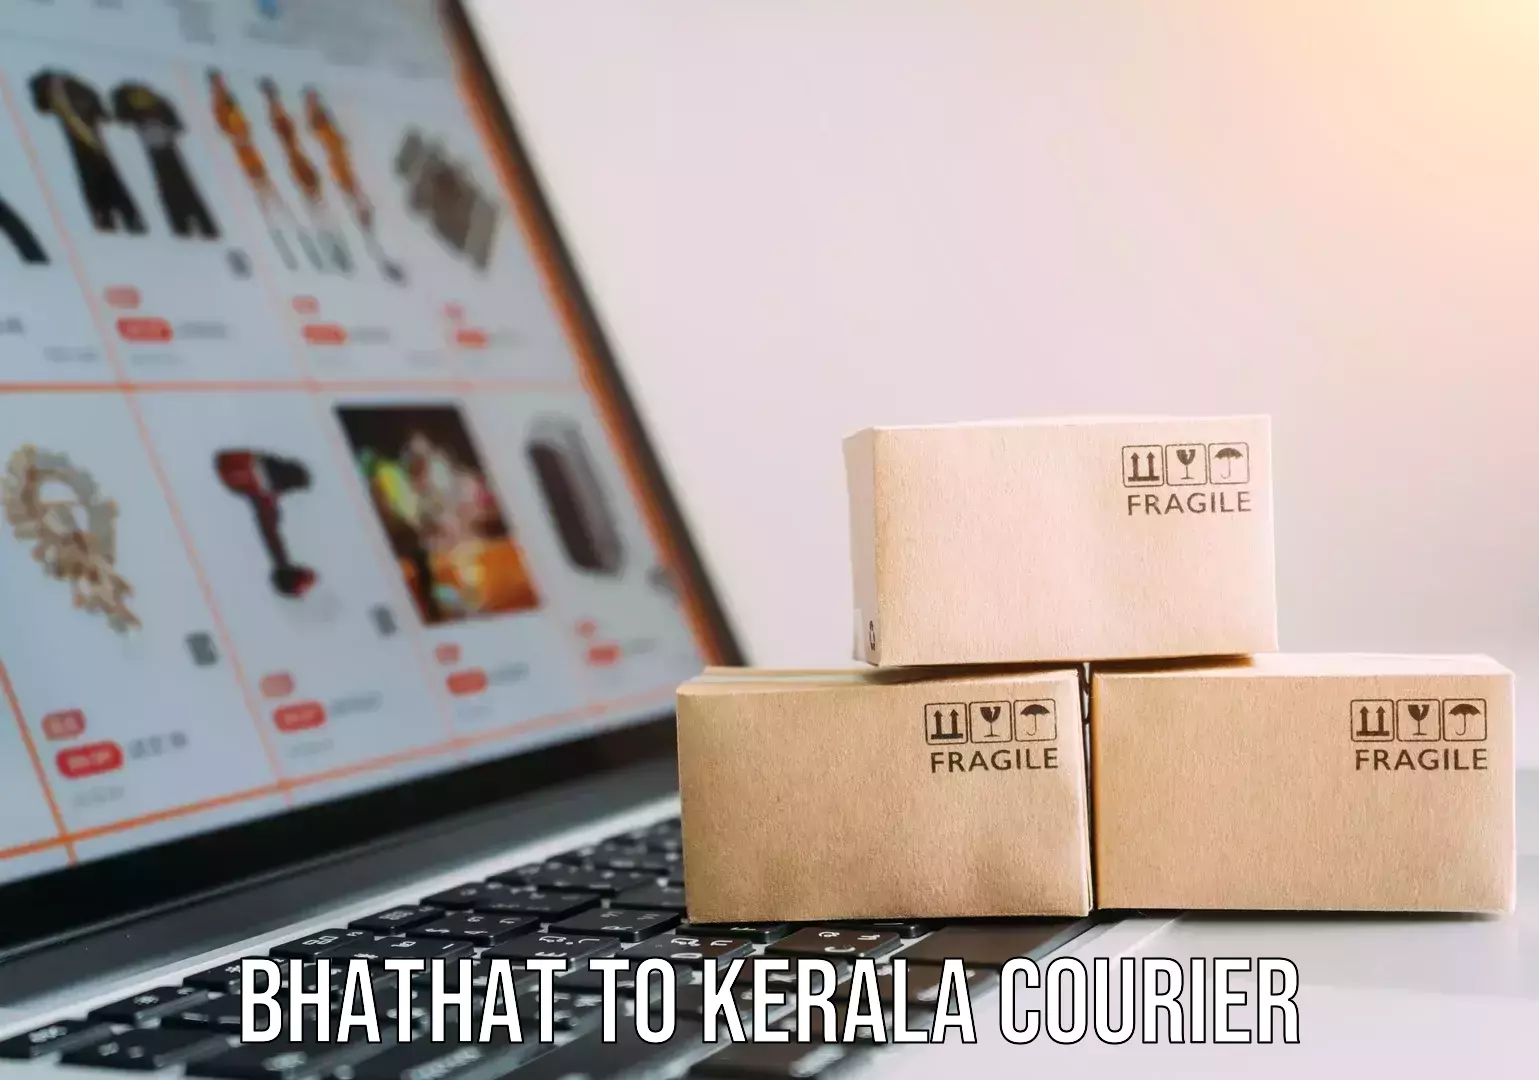 Affordable international shipping Bhathat to Kerala